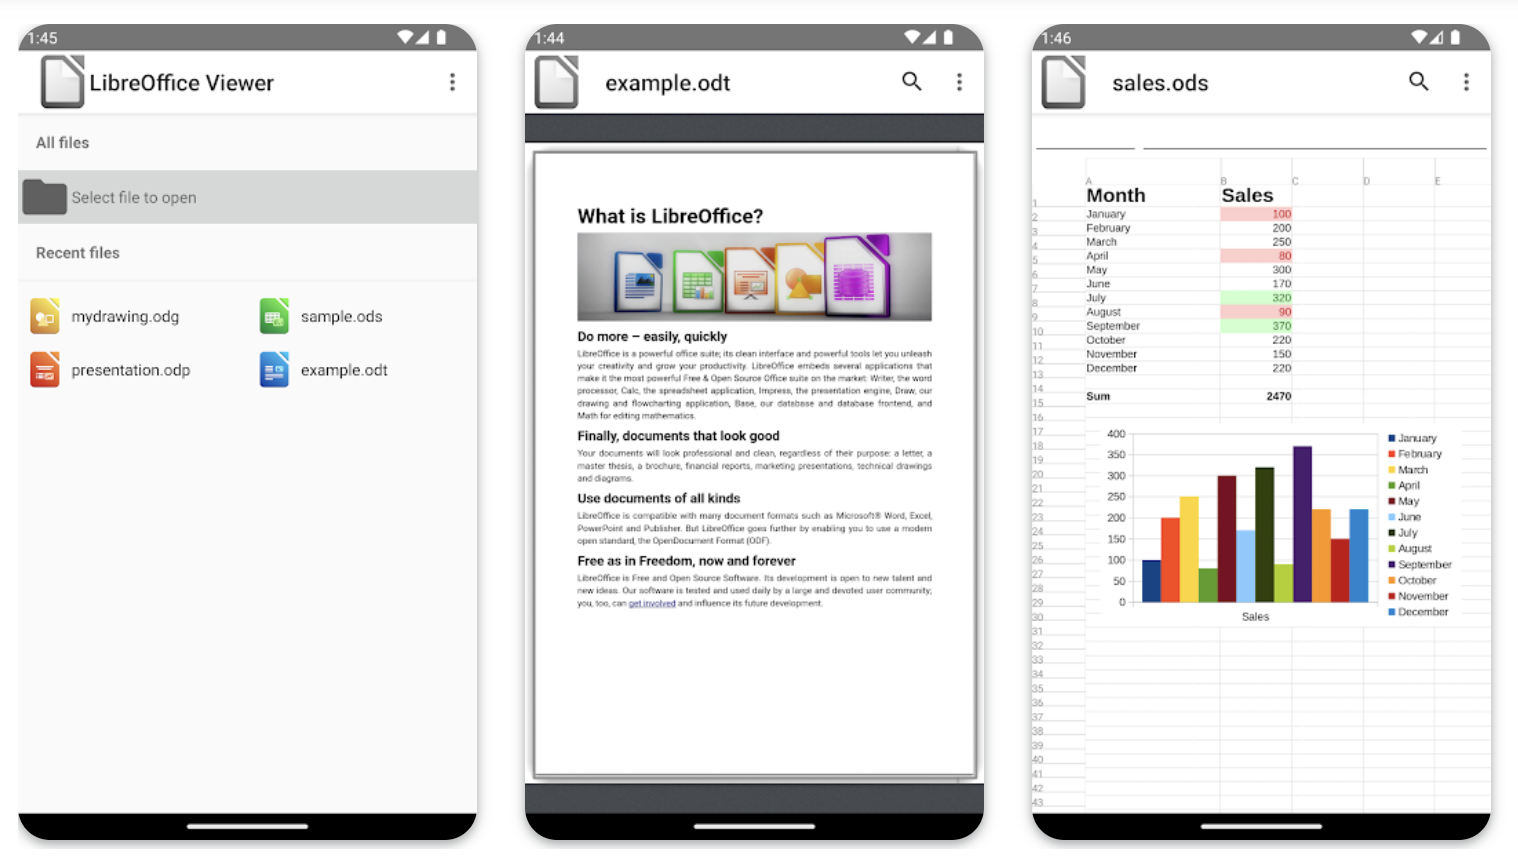 libreoffice-viewer-android